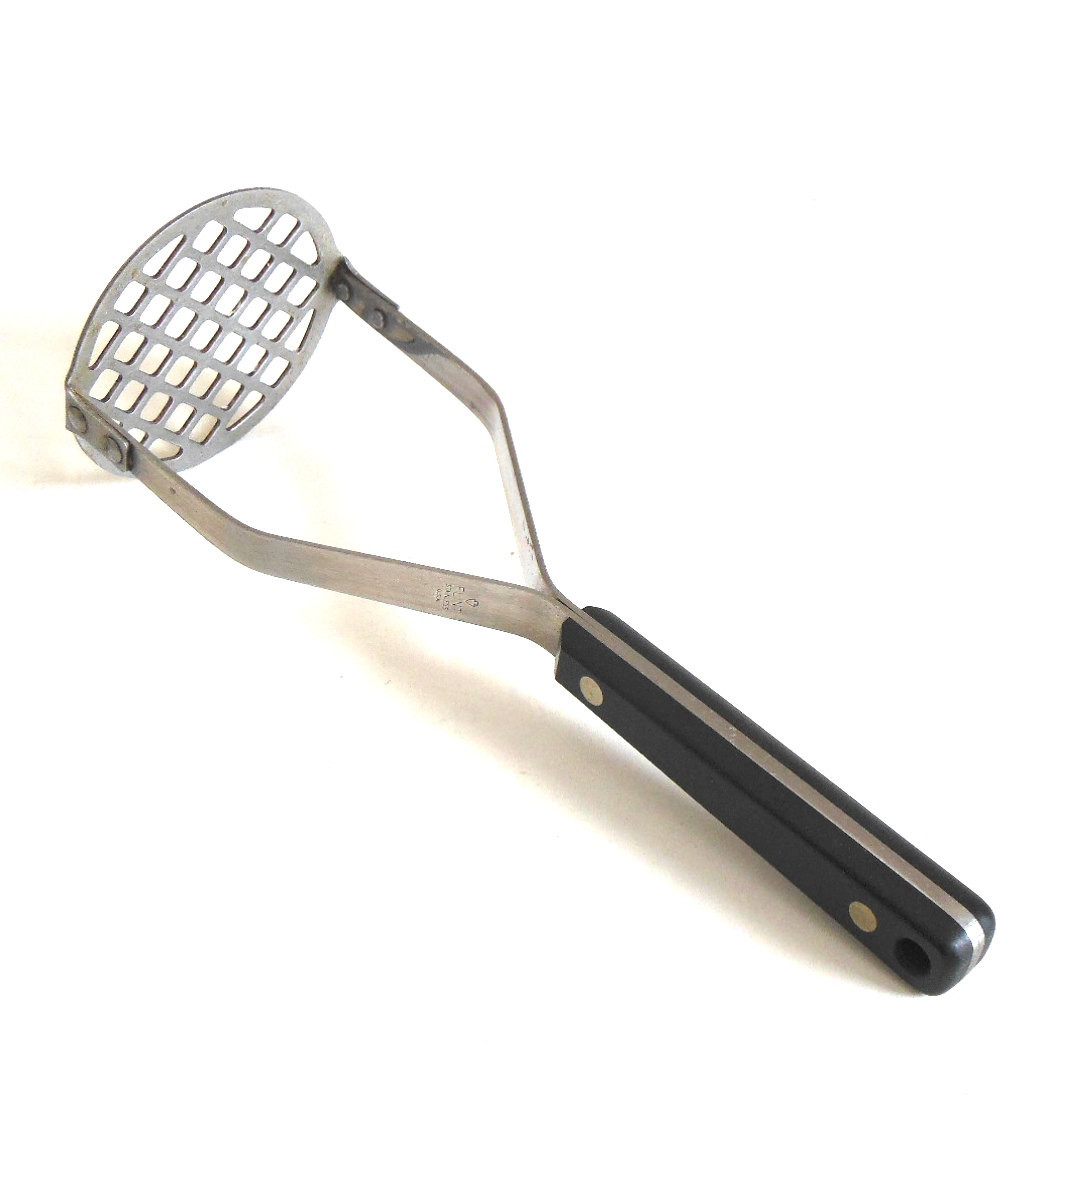 Best Potato Masher
 What is the difference between these potato mashers